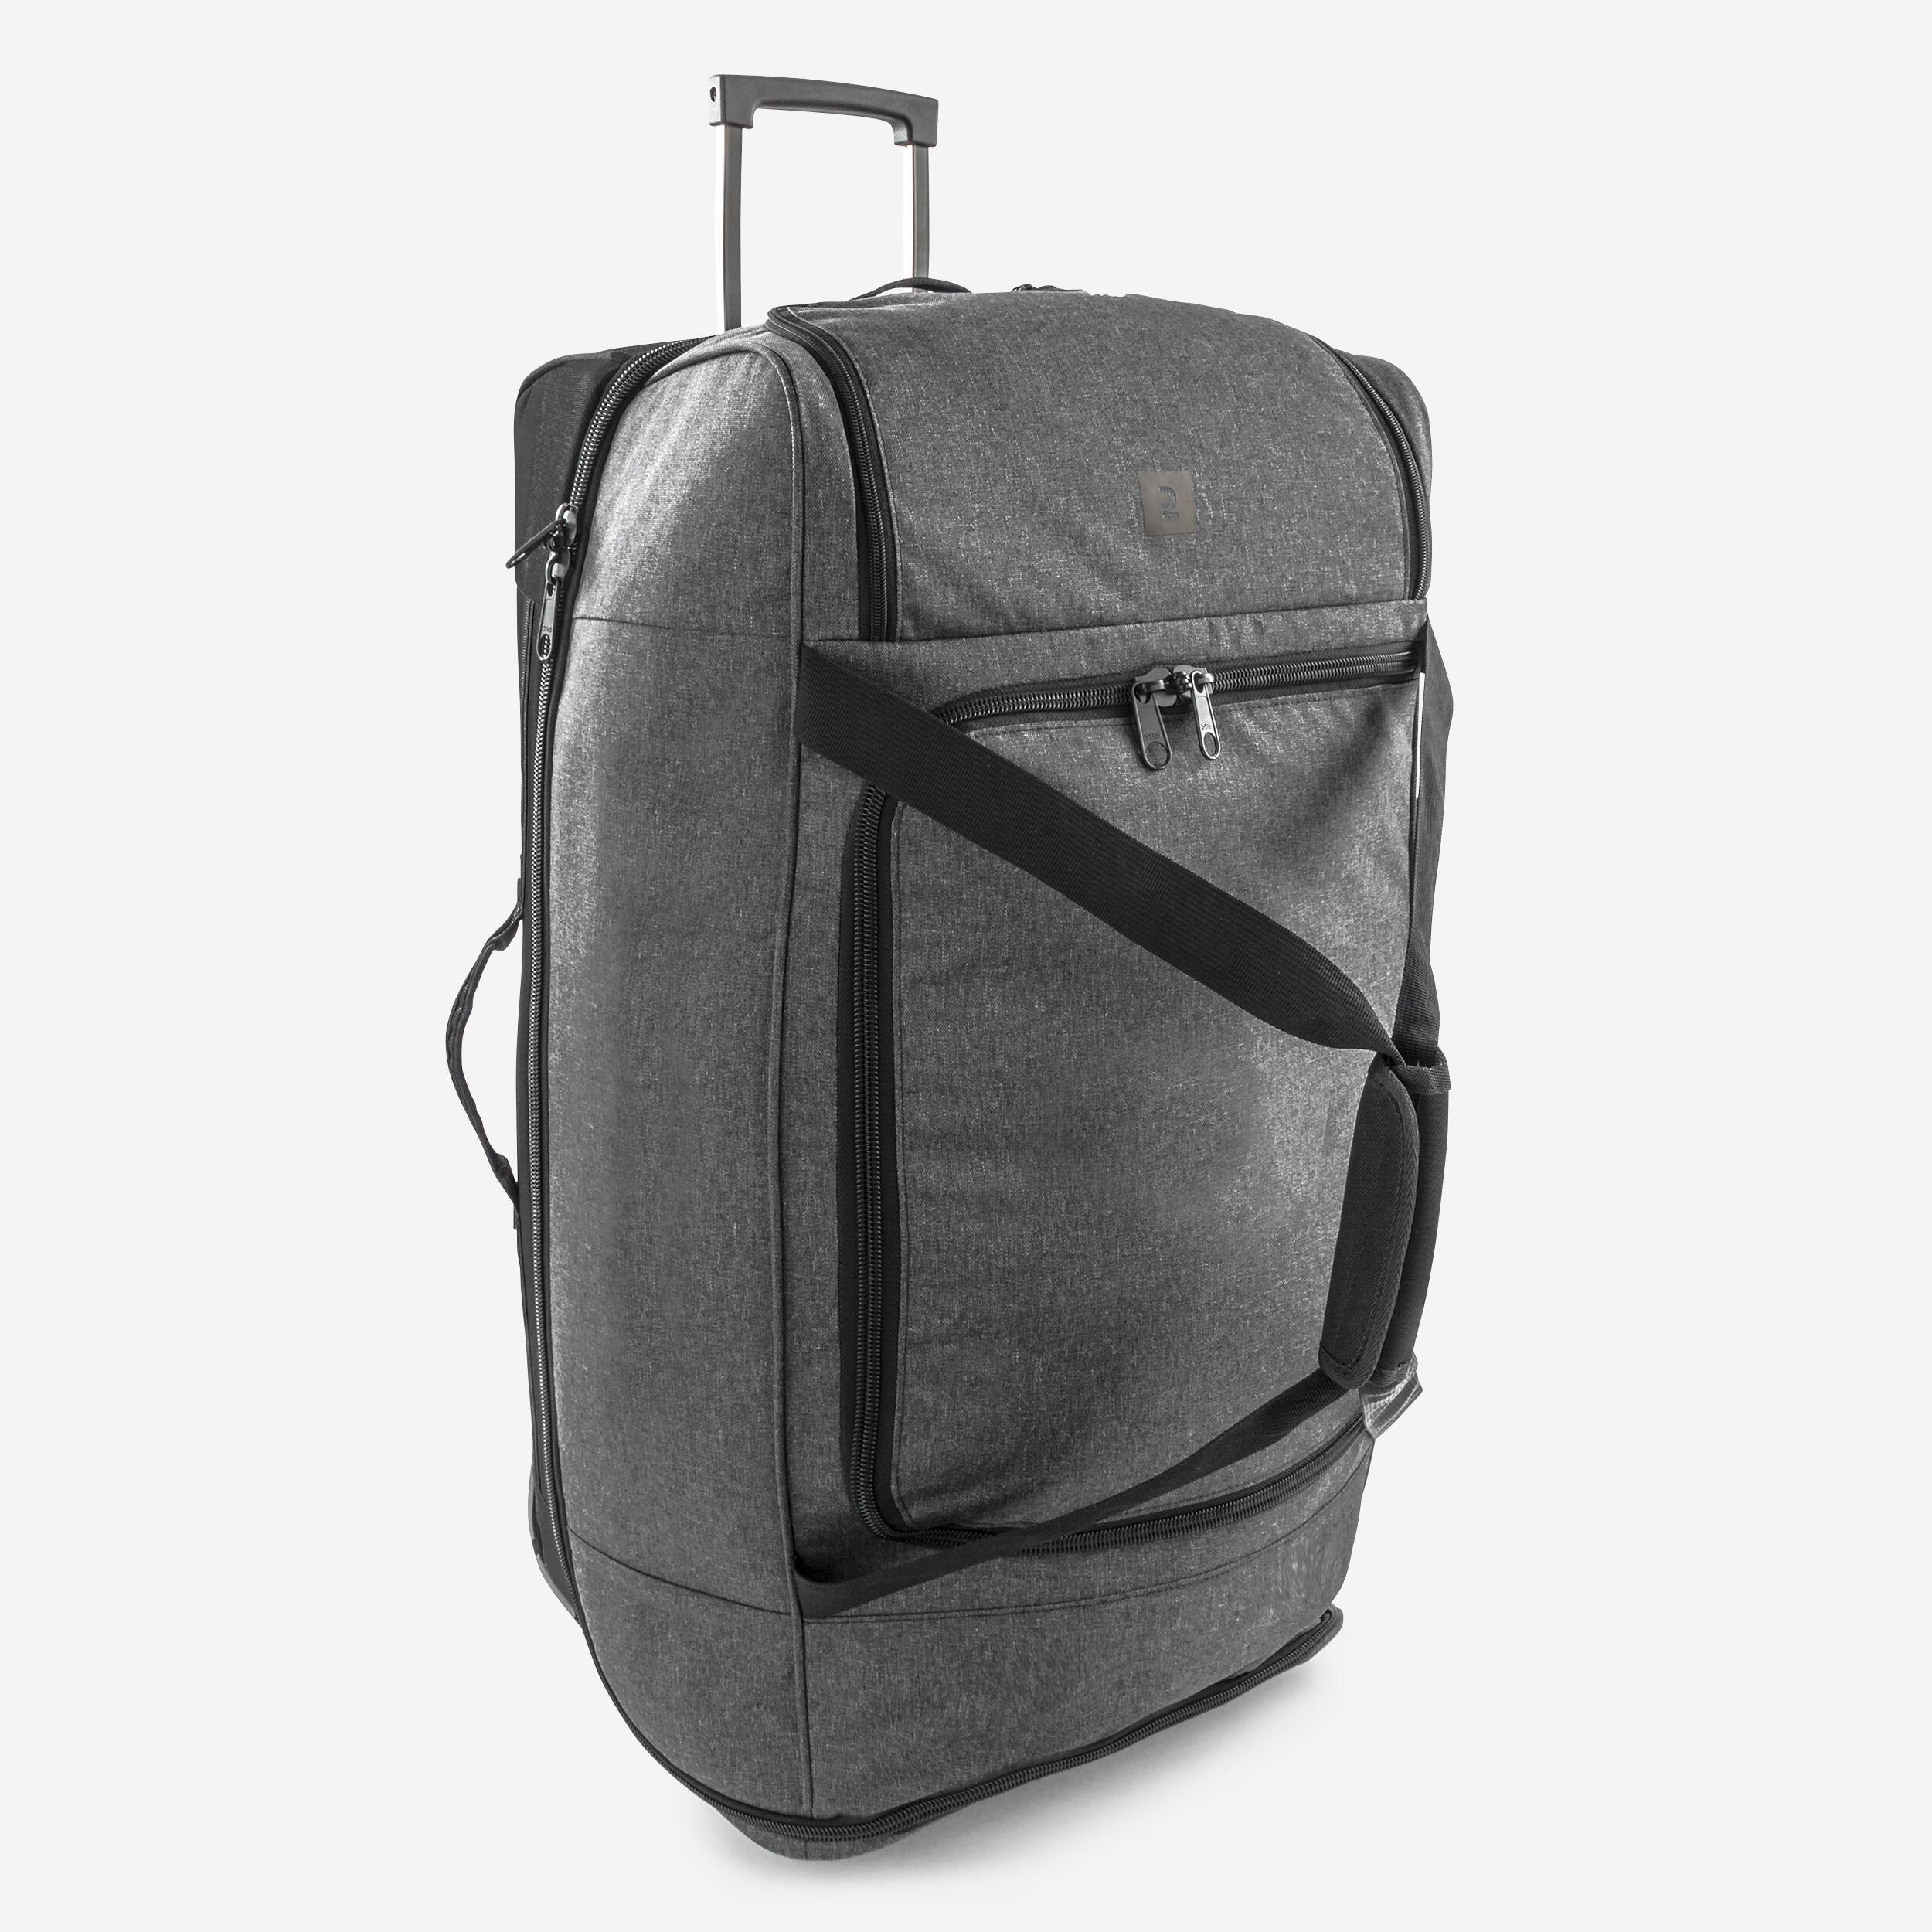 Large football travel suitcase, charcoal 2/14